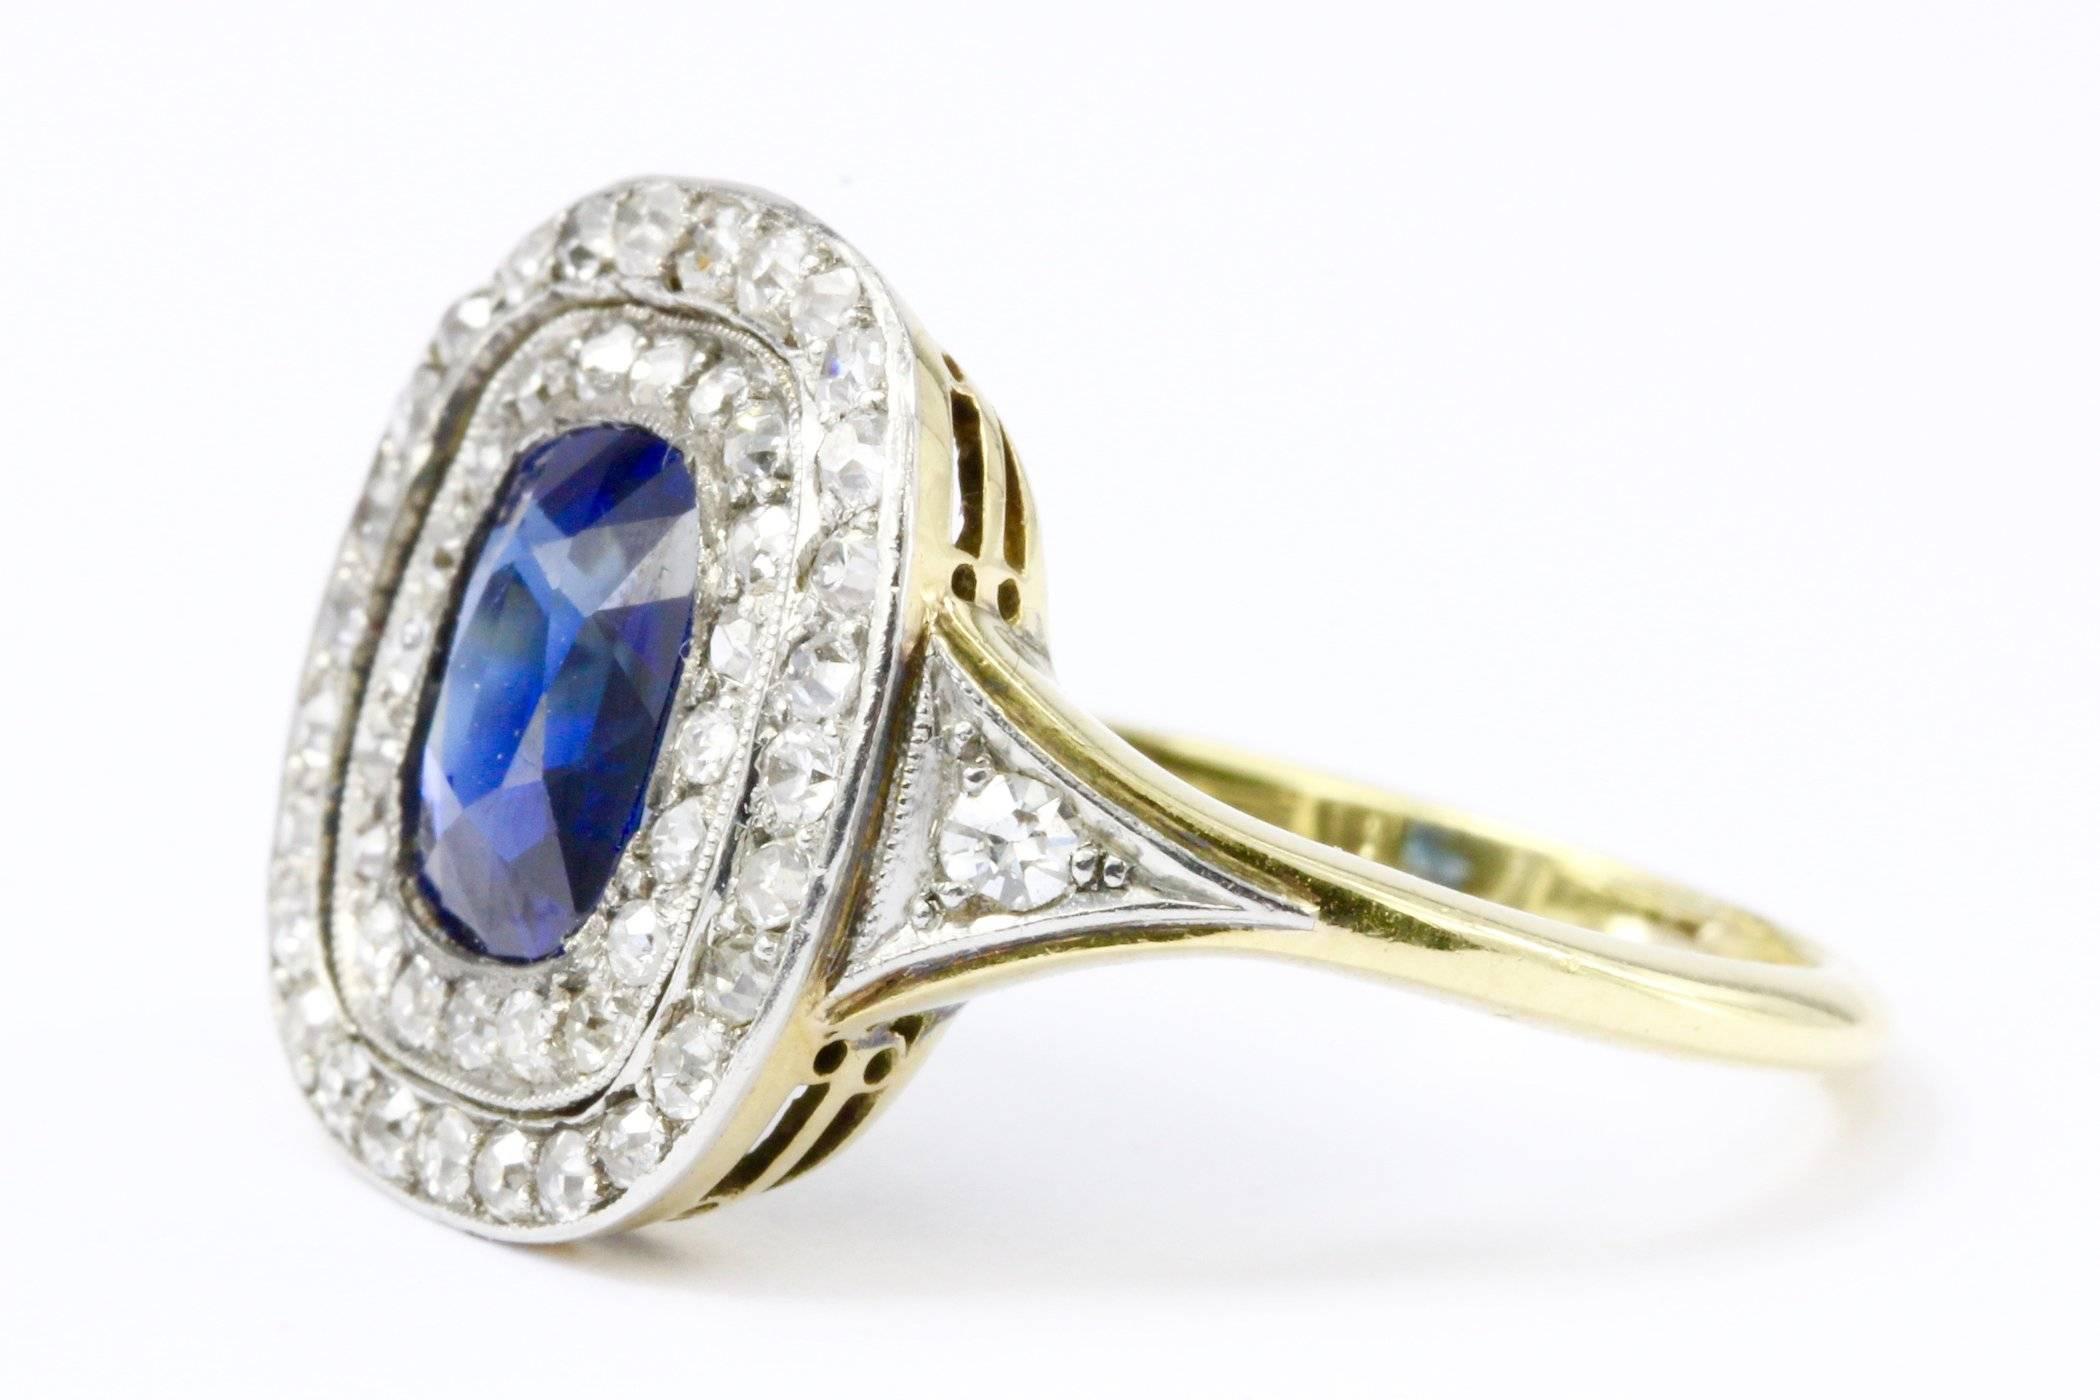 Era: Edwardian

Main Stone: GIA Certified Natural No Heat Cushion Cut Sapphire

Approximate Carat Weight: 1.75 Carats 

Diamonds: .5ctw Single Cut Old Euro's

Clarity: Vs2-Si2

Color: H-K

Ring Size 6.75

Ring Measurement: 15mm x 15mm

Ring Height: